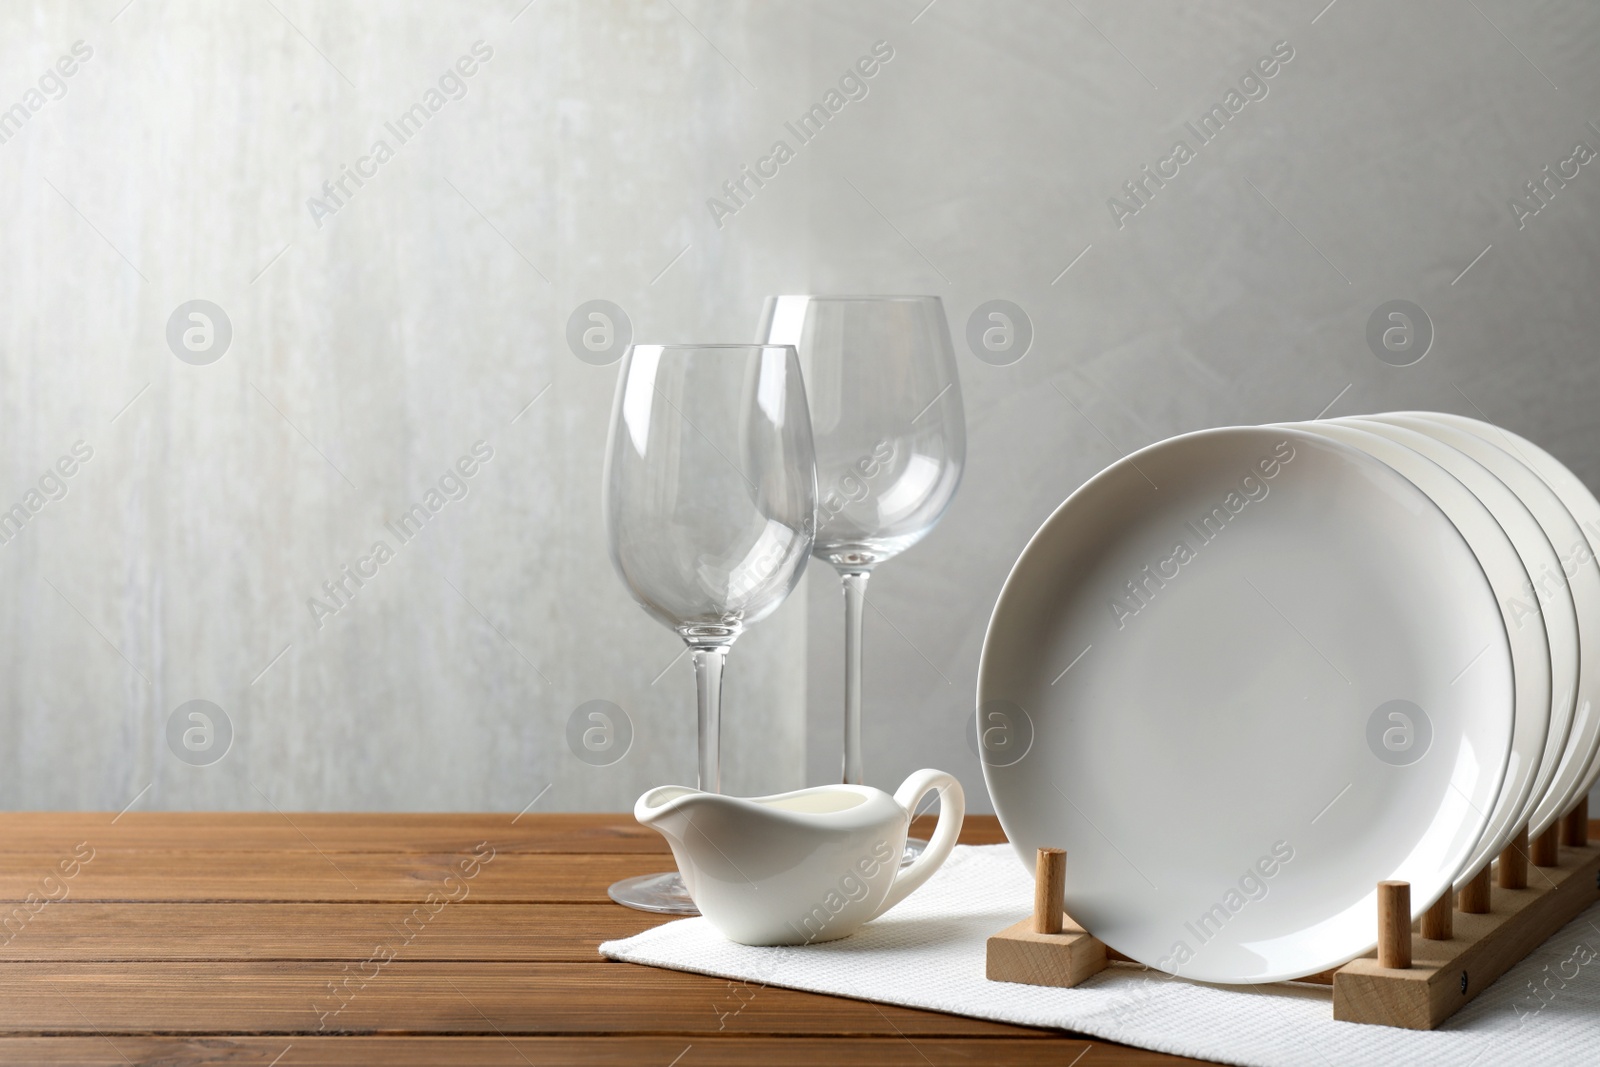 Photo of Set of clean dishware and glasses on wooden table, space for text